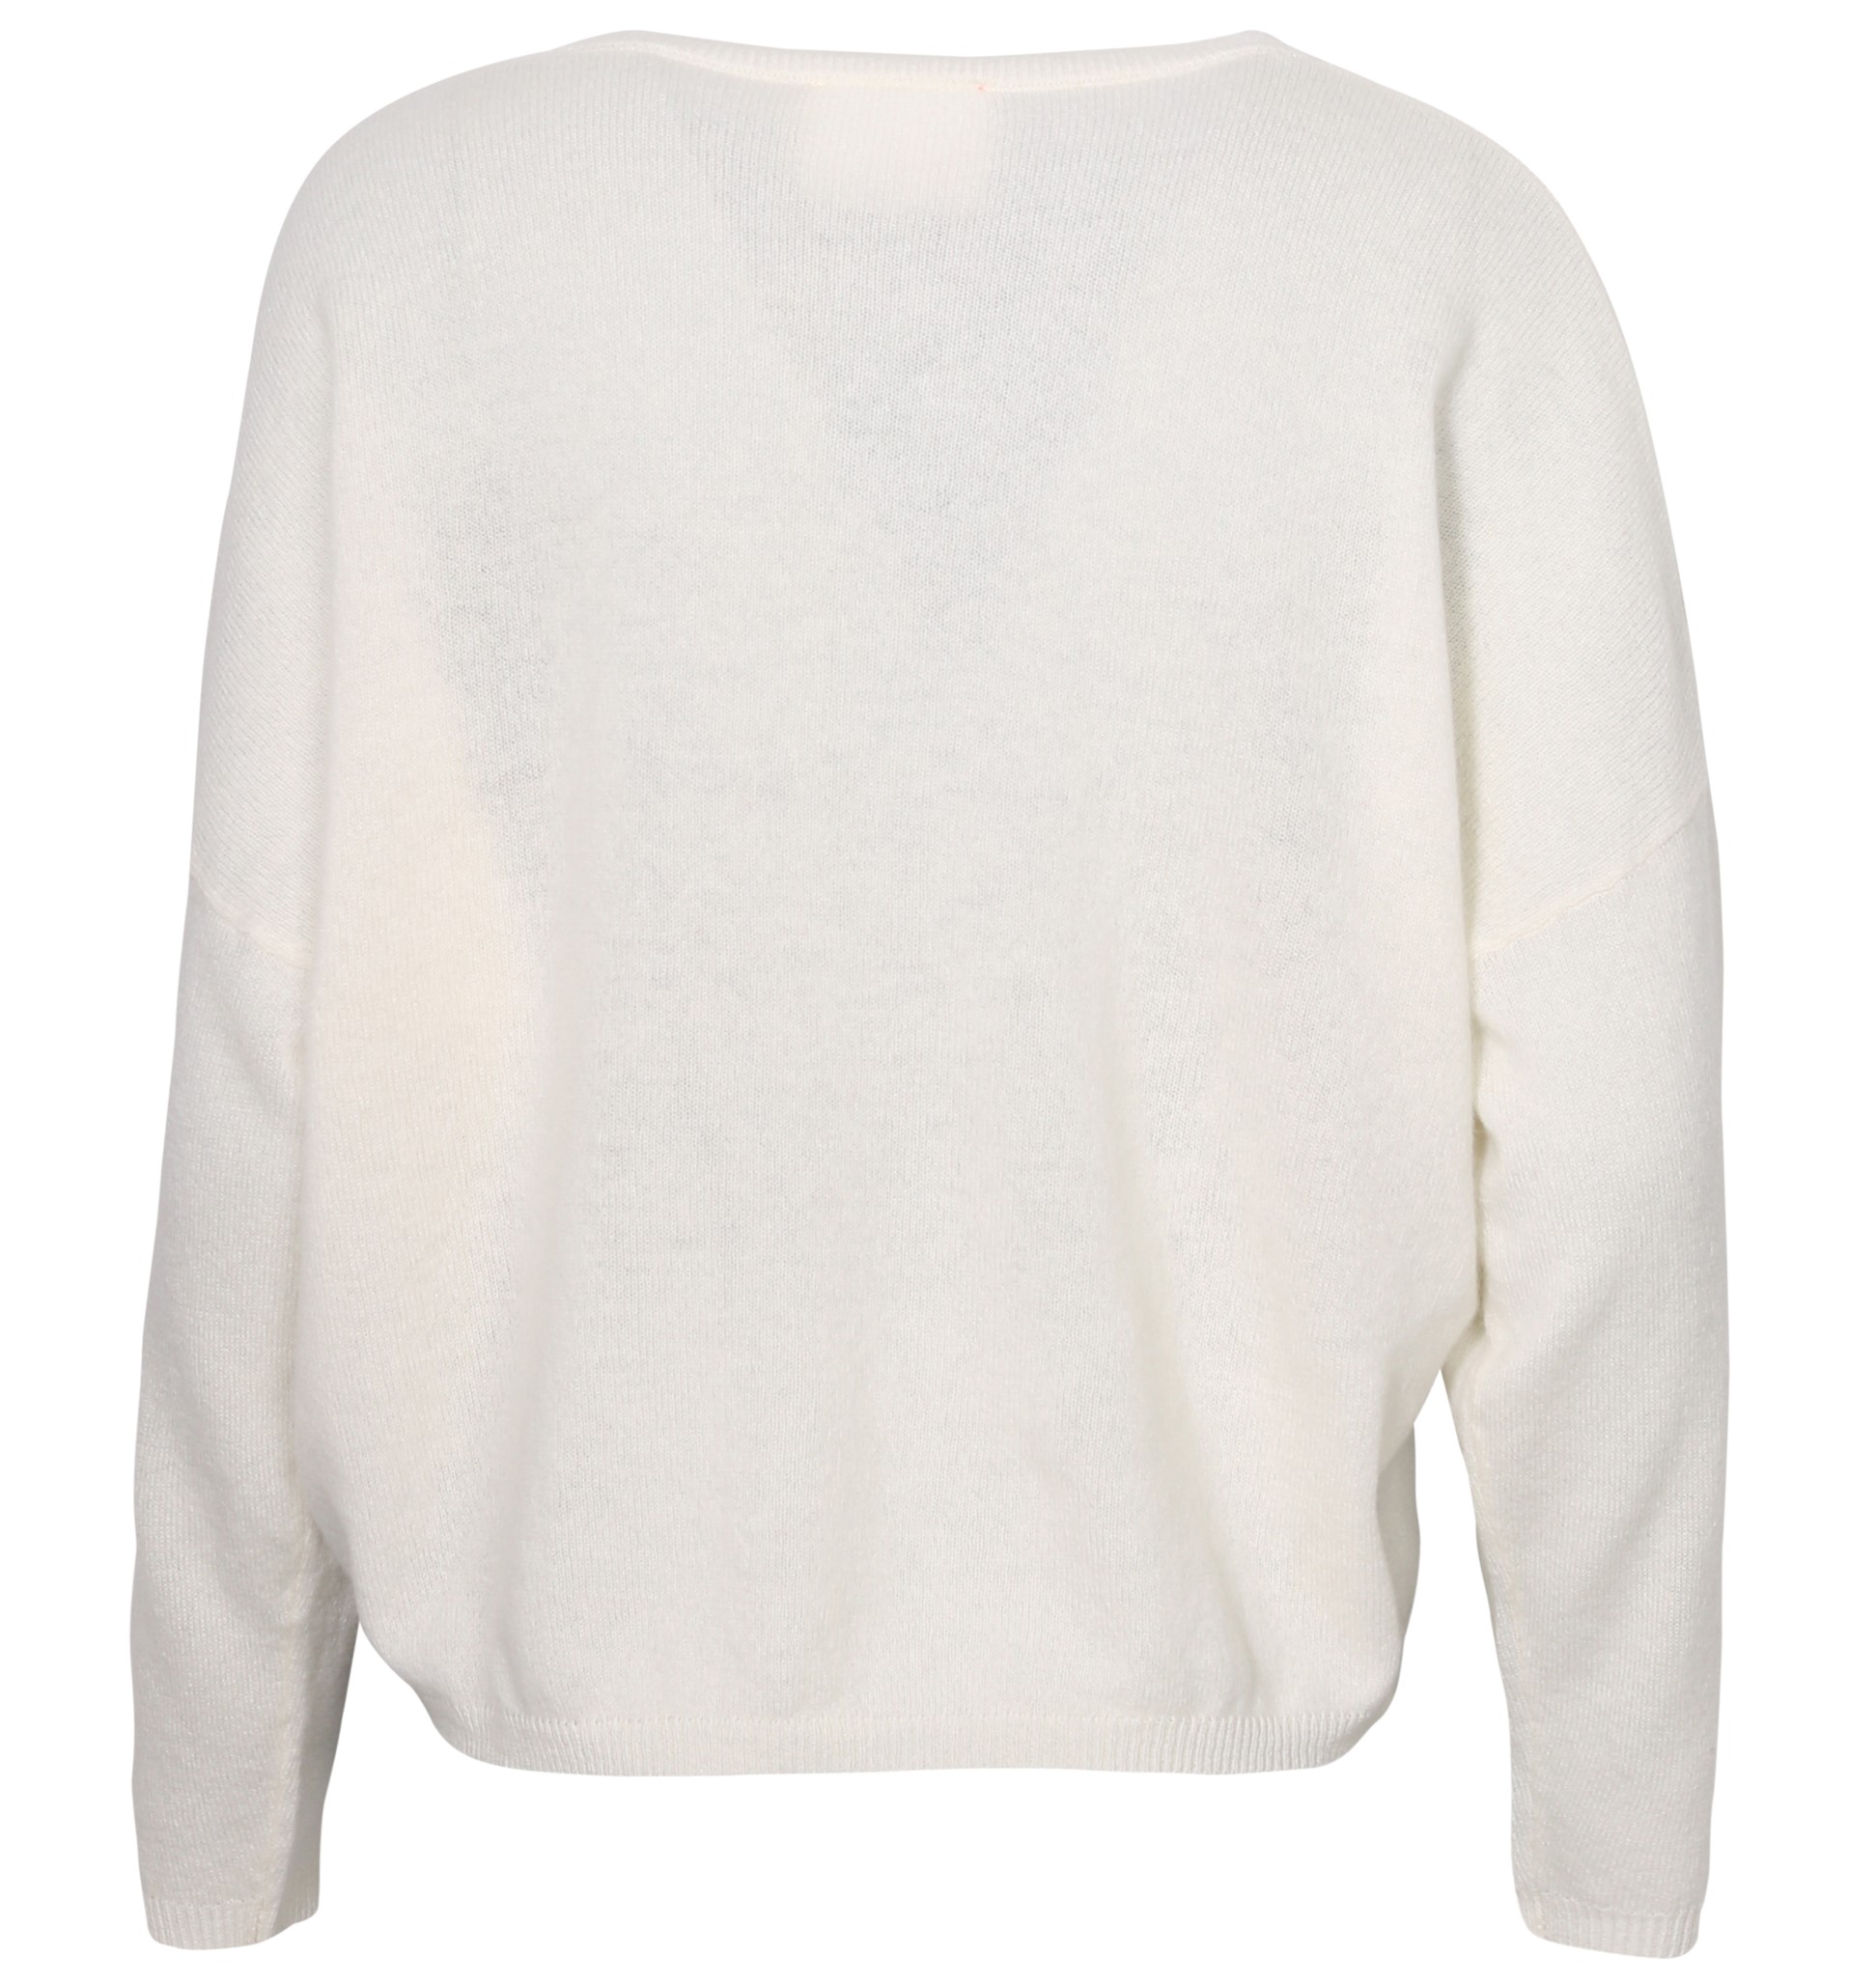 ABSOLUT CASHMERE V-Neck Sweater Alicia in Offwhite XS